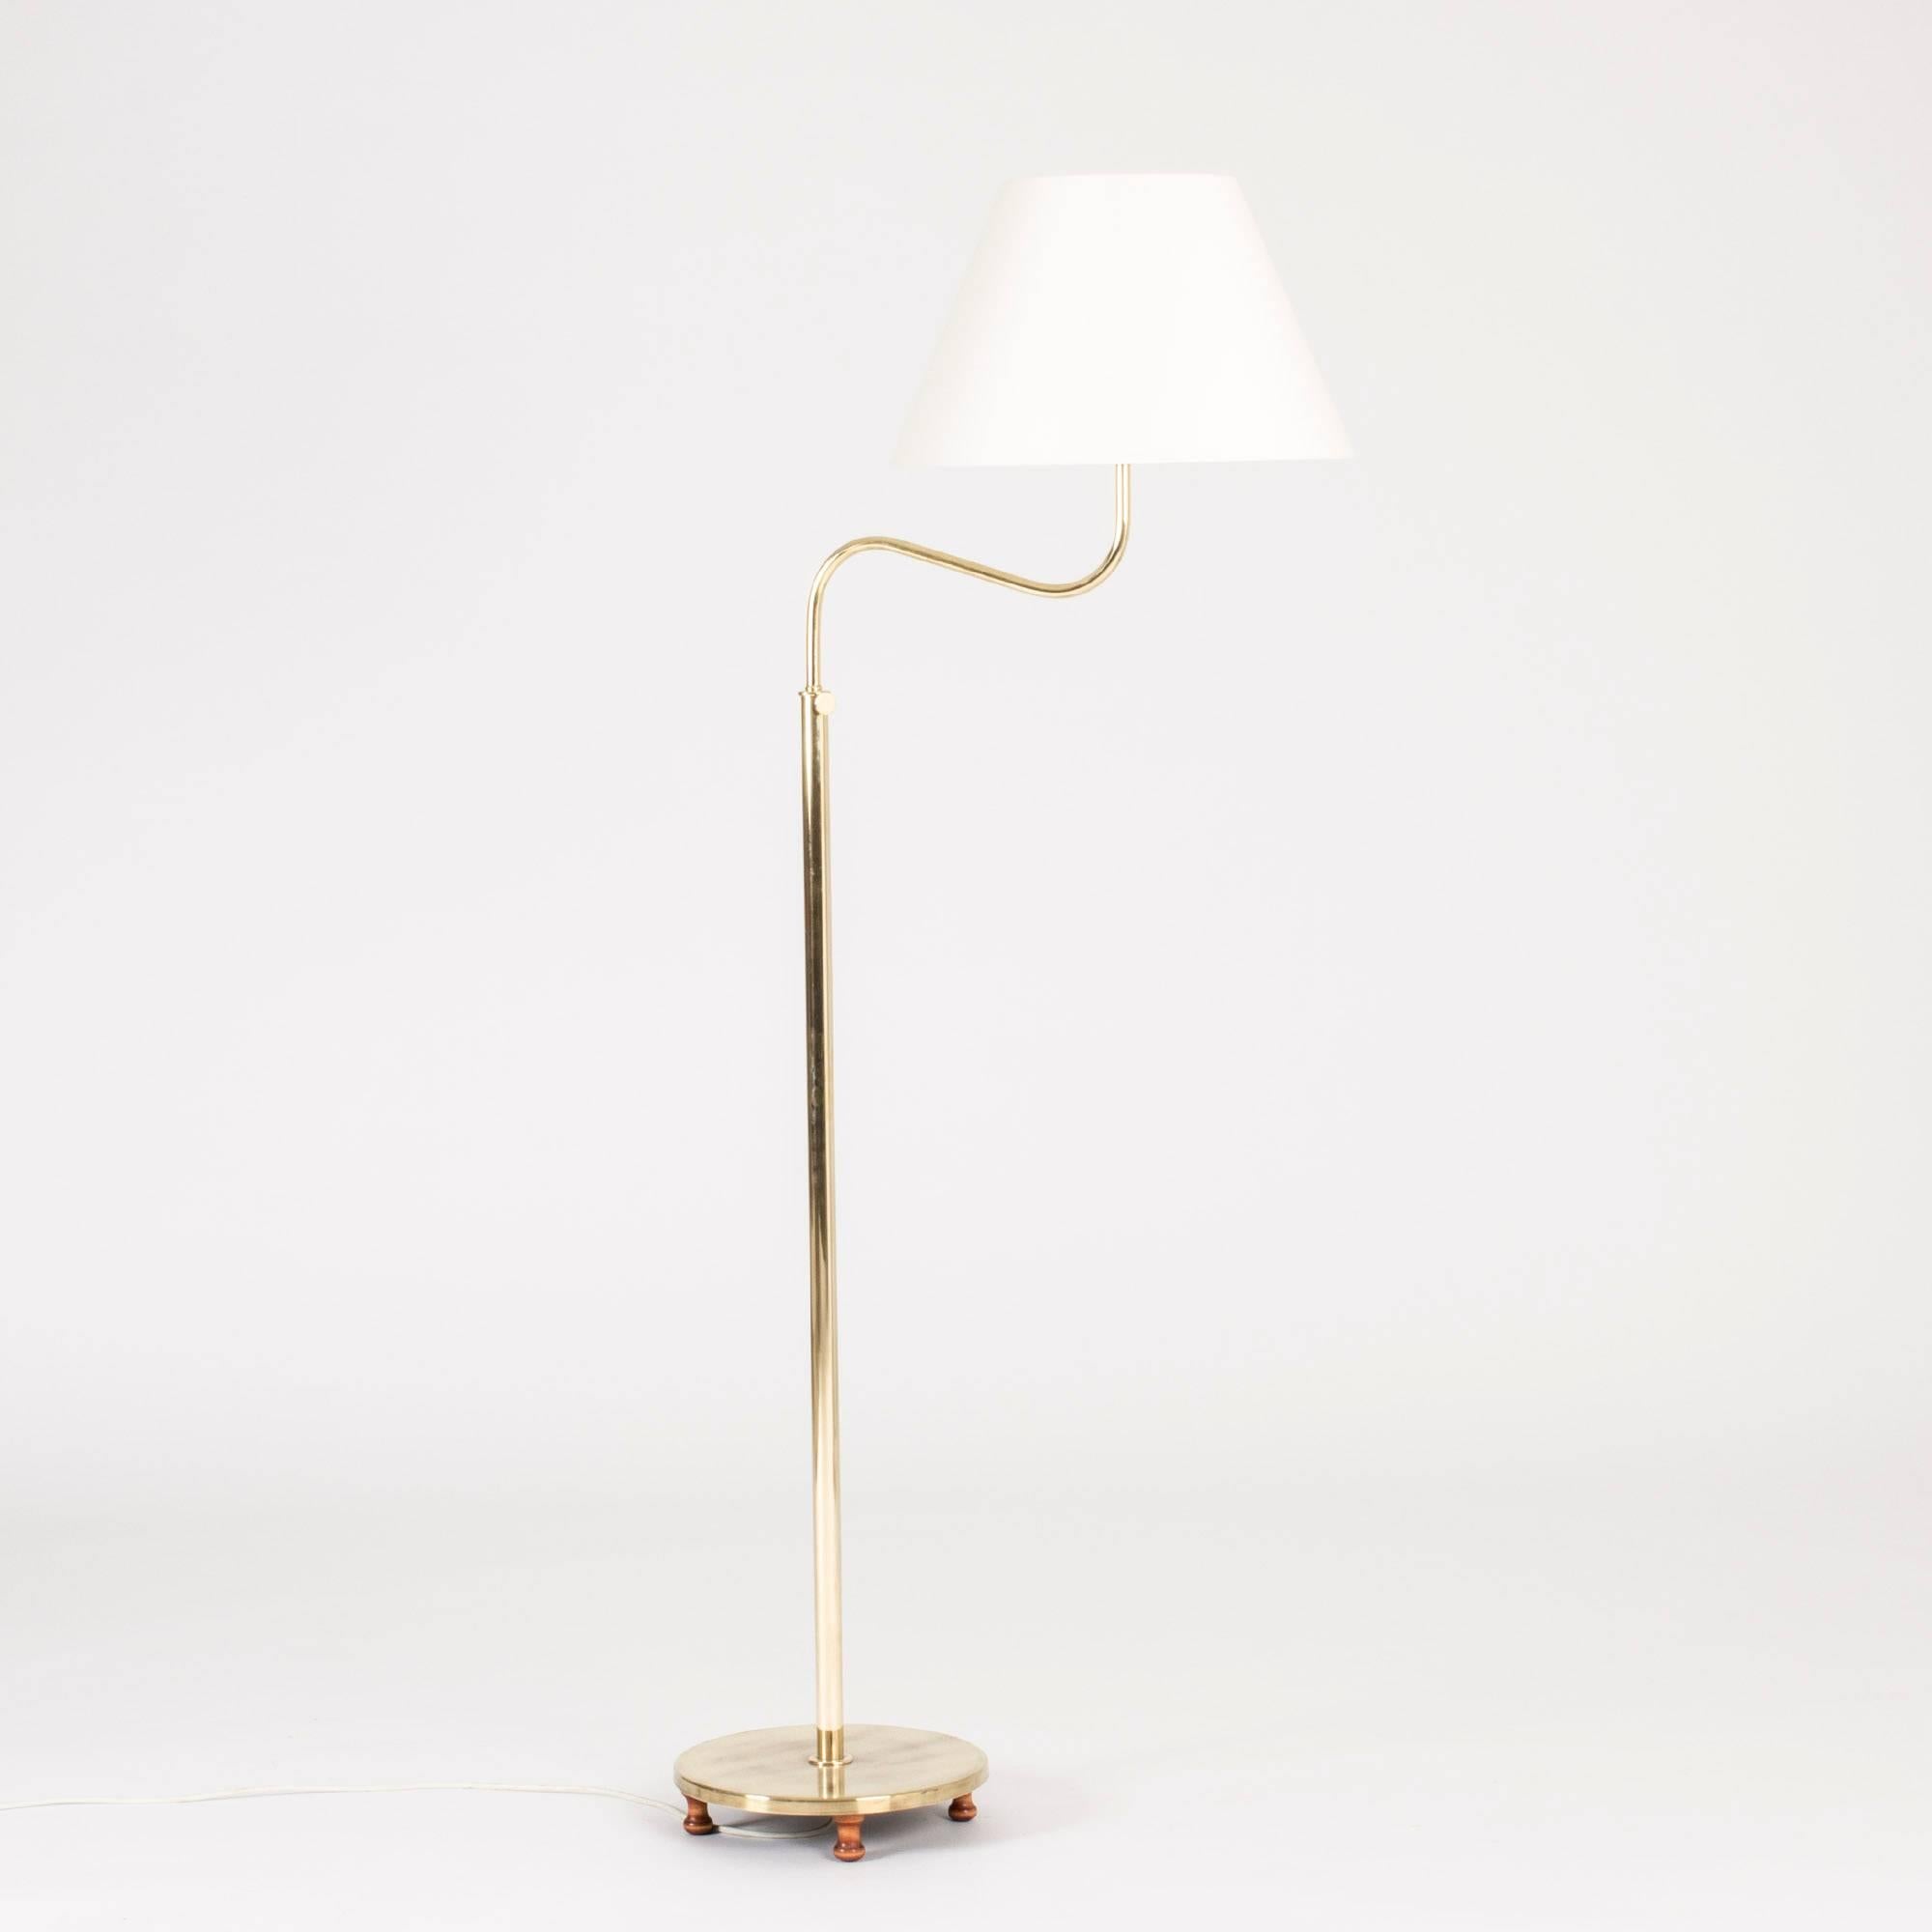 Beautiful, poised “Camel” floor lamp by Josef Frank, made from brass. Adjustable height. The disc base is elevated by little sculpted wooden feet.
The height is adjustable between 145 and 160 cm. The diameter of the lampshade is 40 cm and the